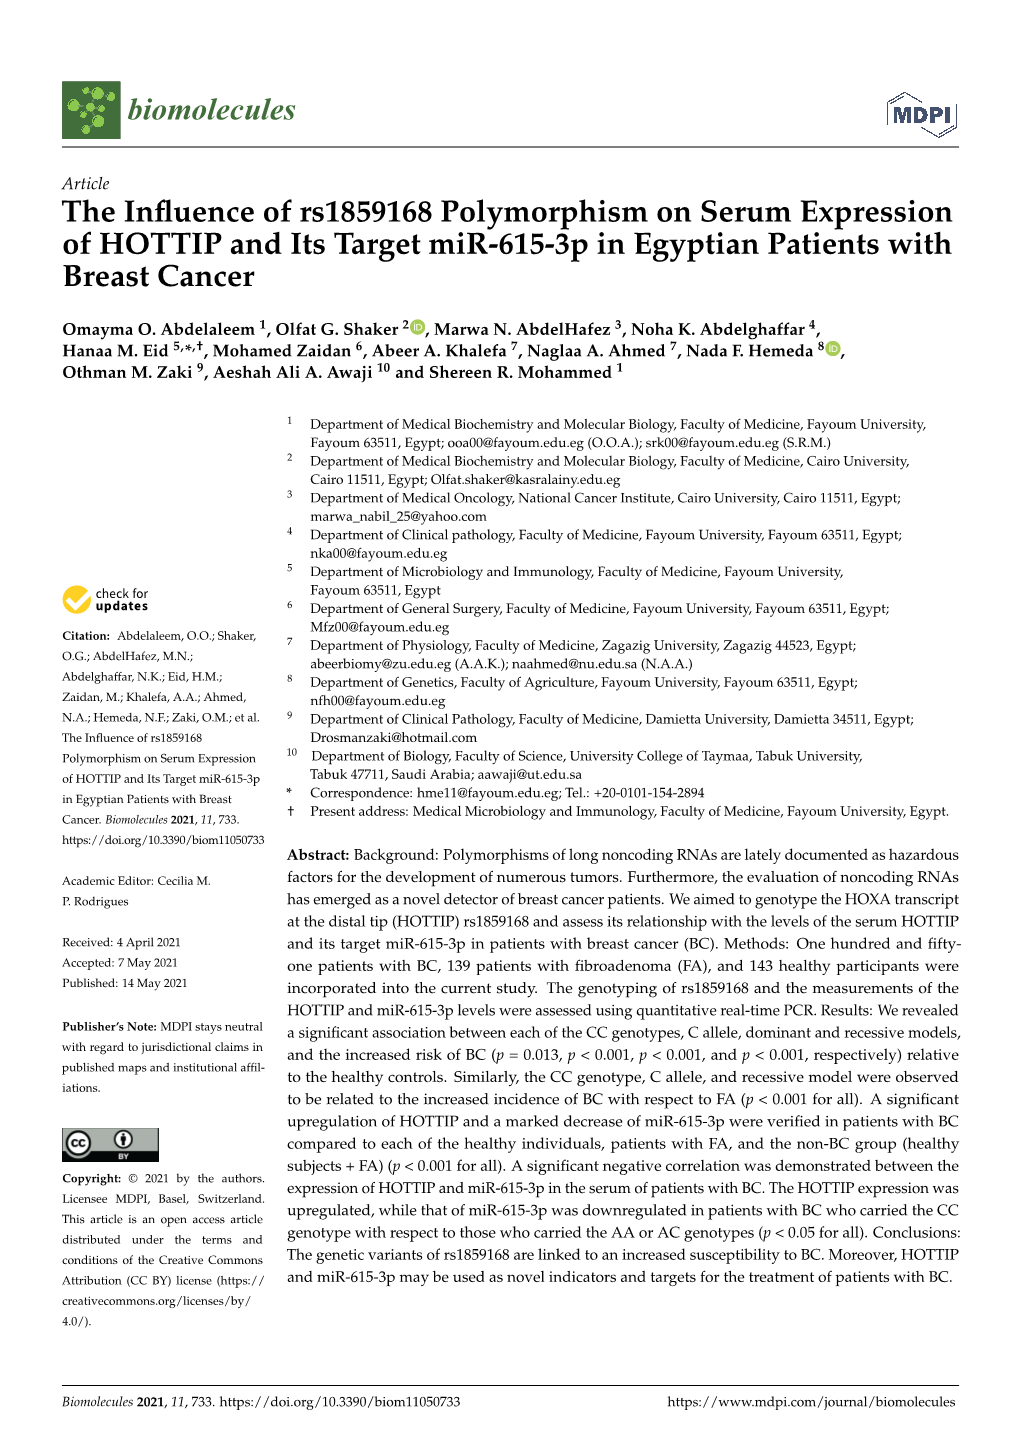 The Influence of Rs1859168 Polymorphism on Serum Expression of HOTTIP and Its Target Mir-615-3P in Egyptian Patients with Breast